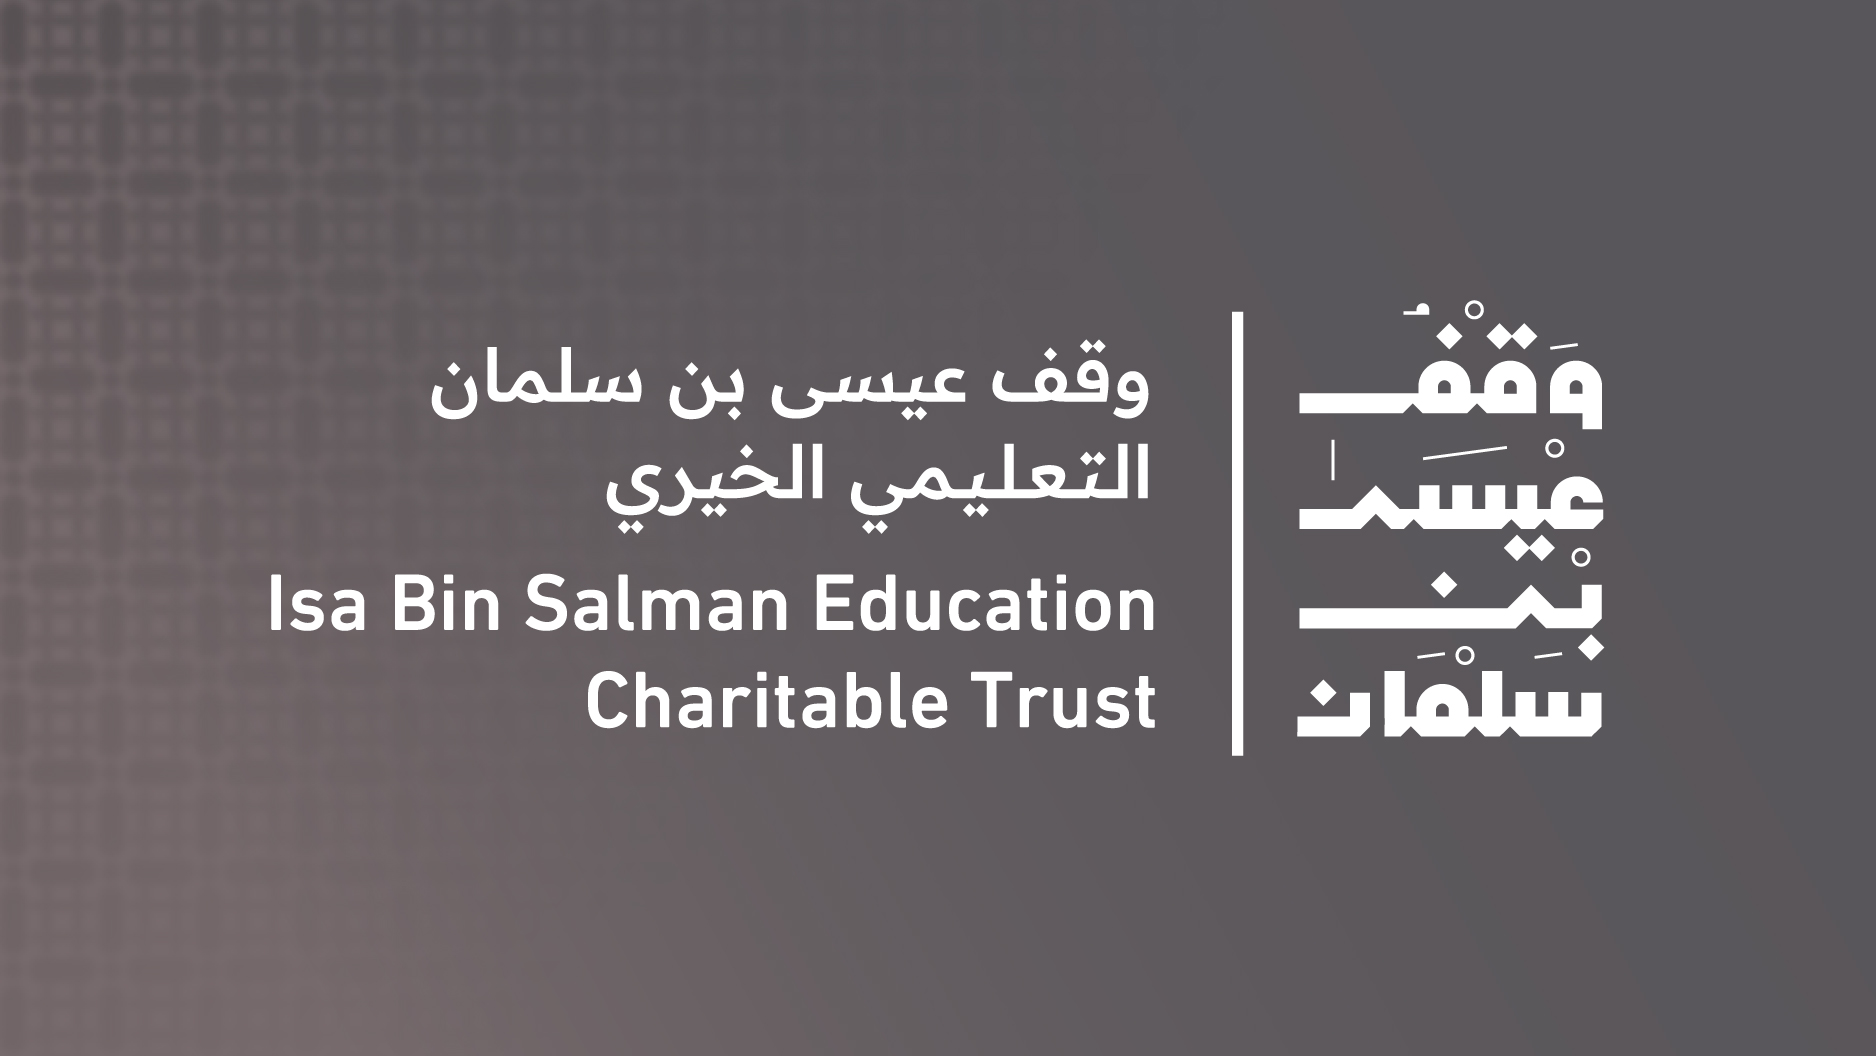 The Isa bin Salman Education Charitable Trust opens applications for its scholarships for the 2022-2023 academic year